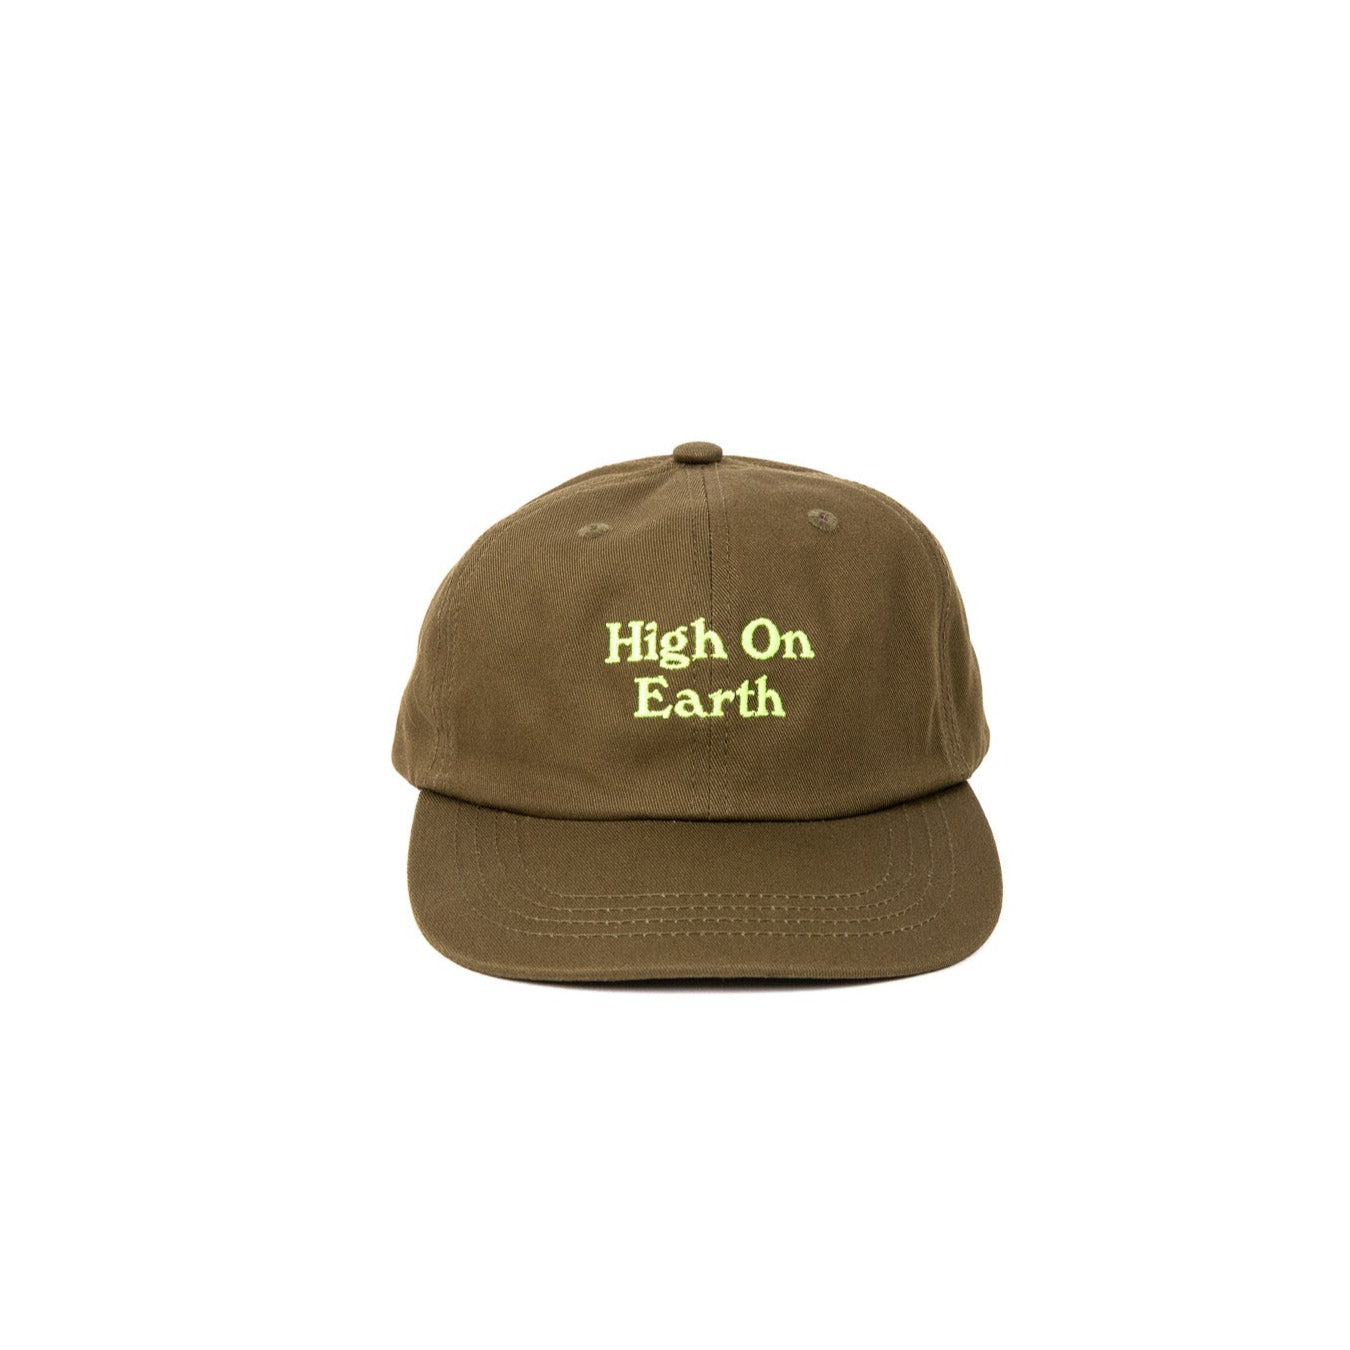 High On Earth hat - Olive